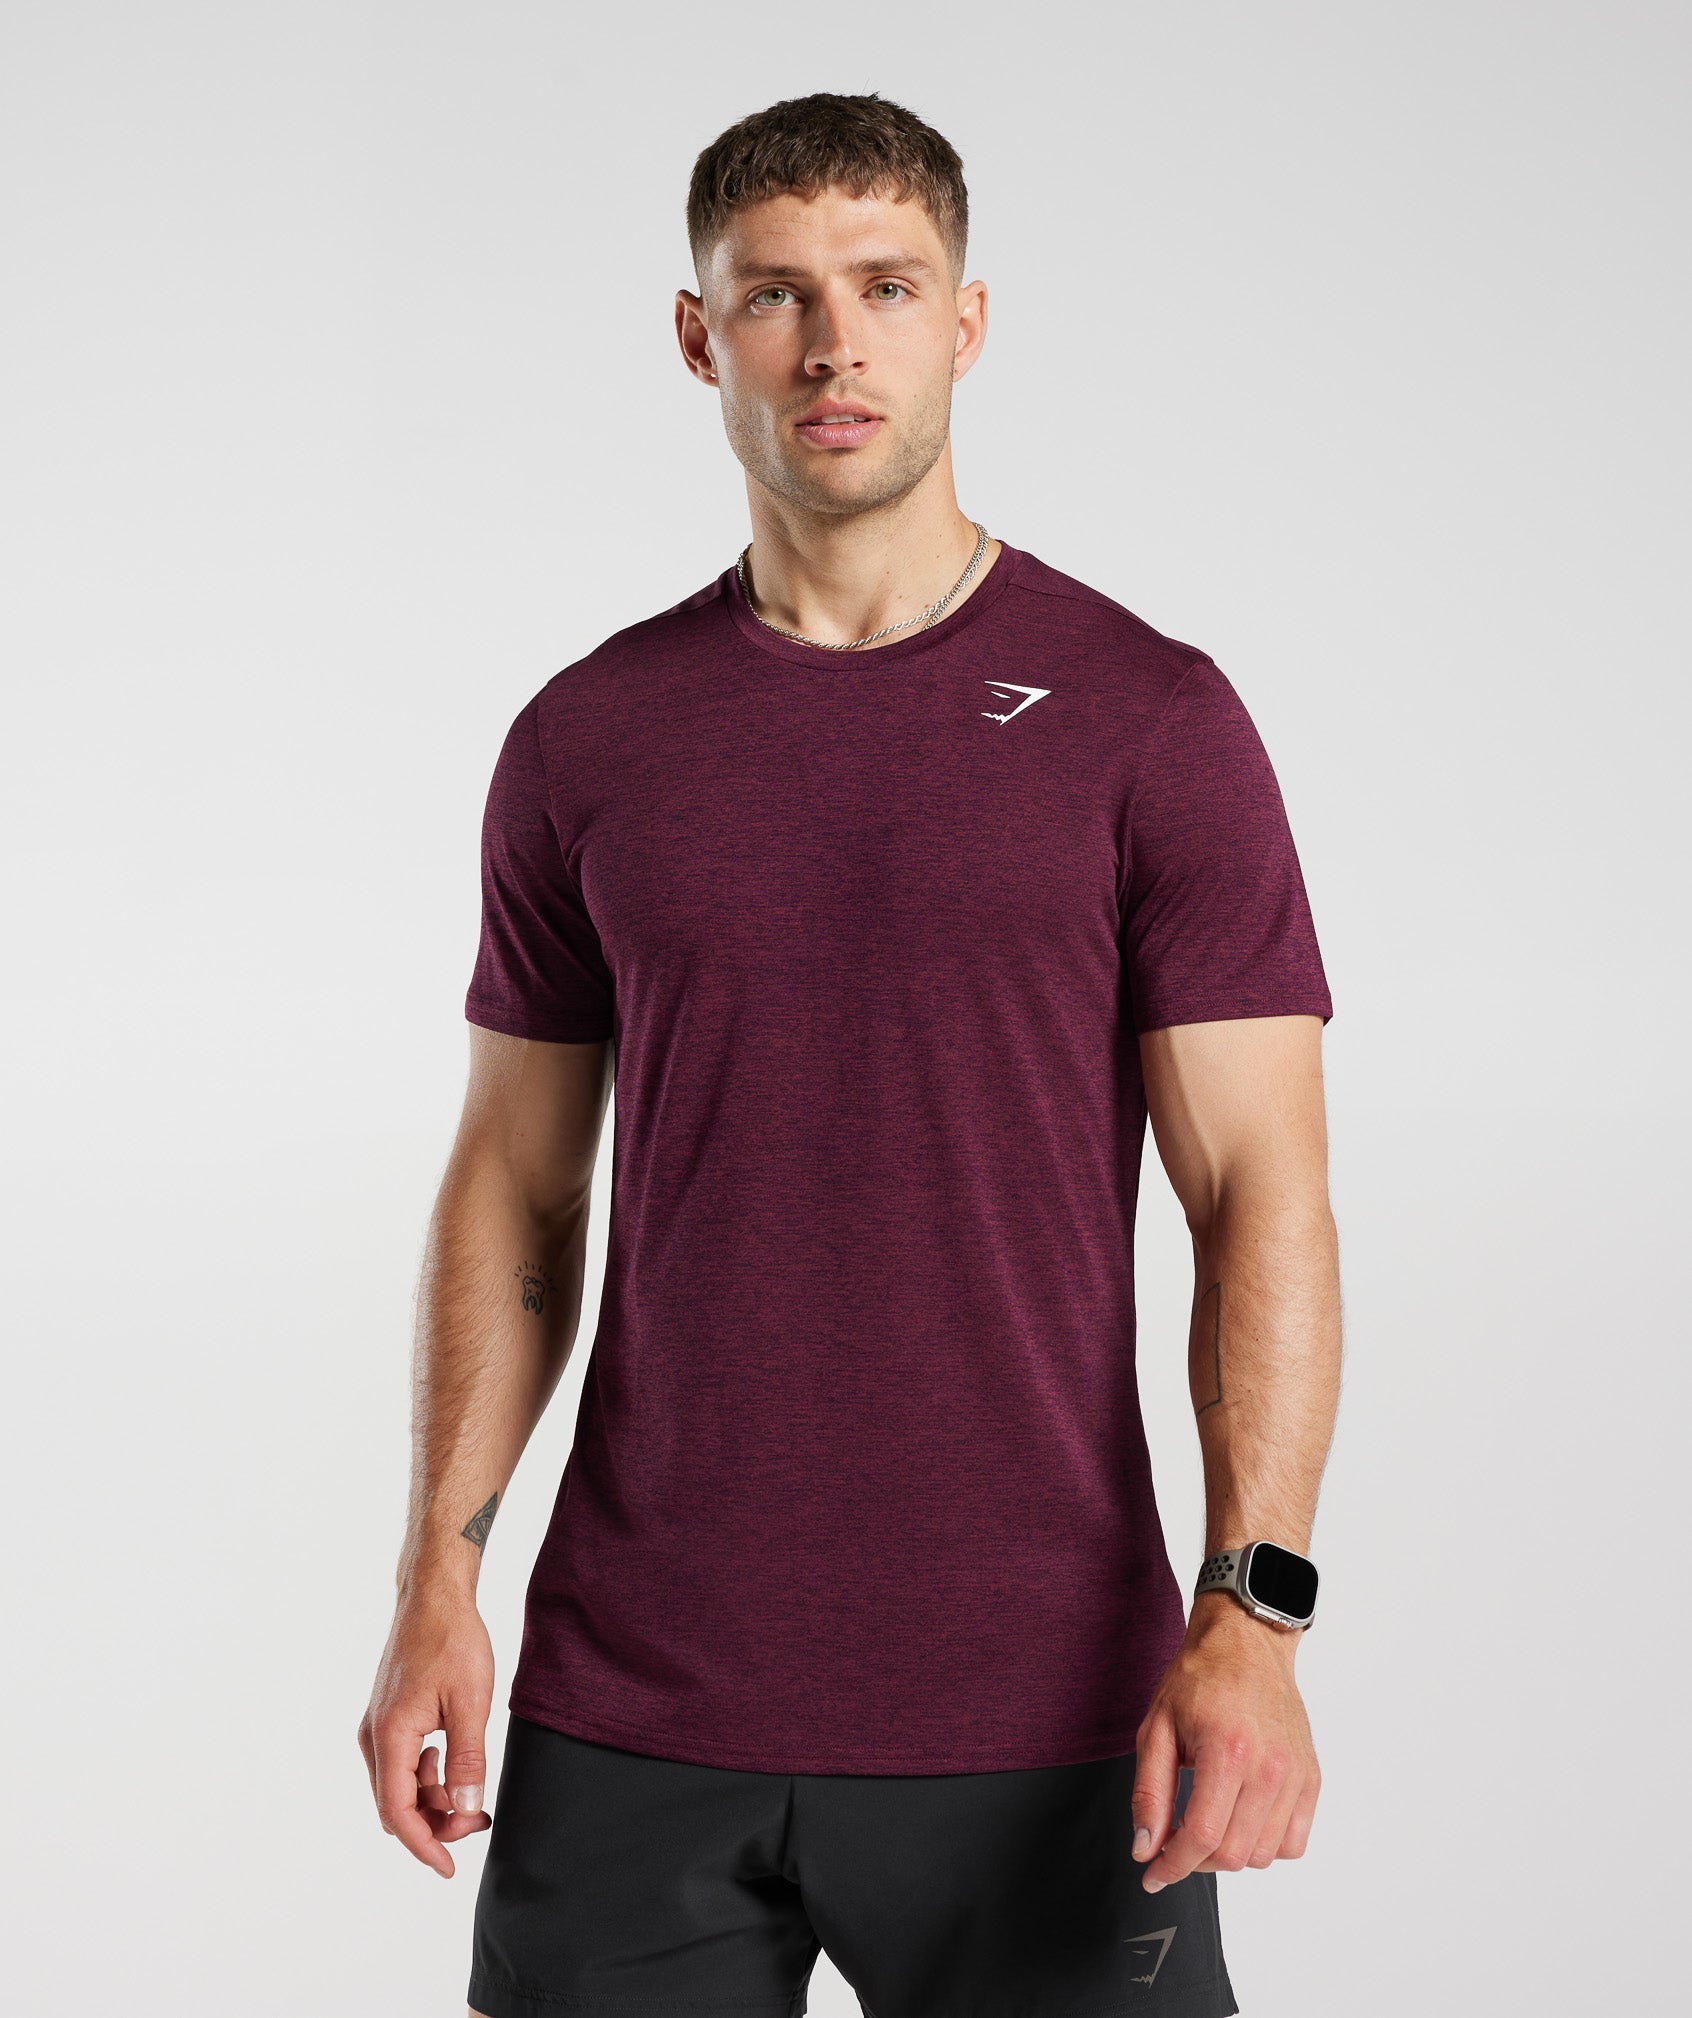 Arrival Marl T-Shirt in Plum Pink/Plum Brown Marl - view 1